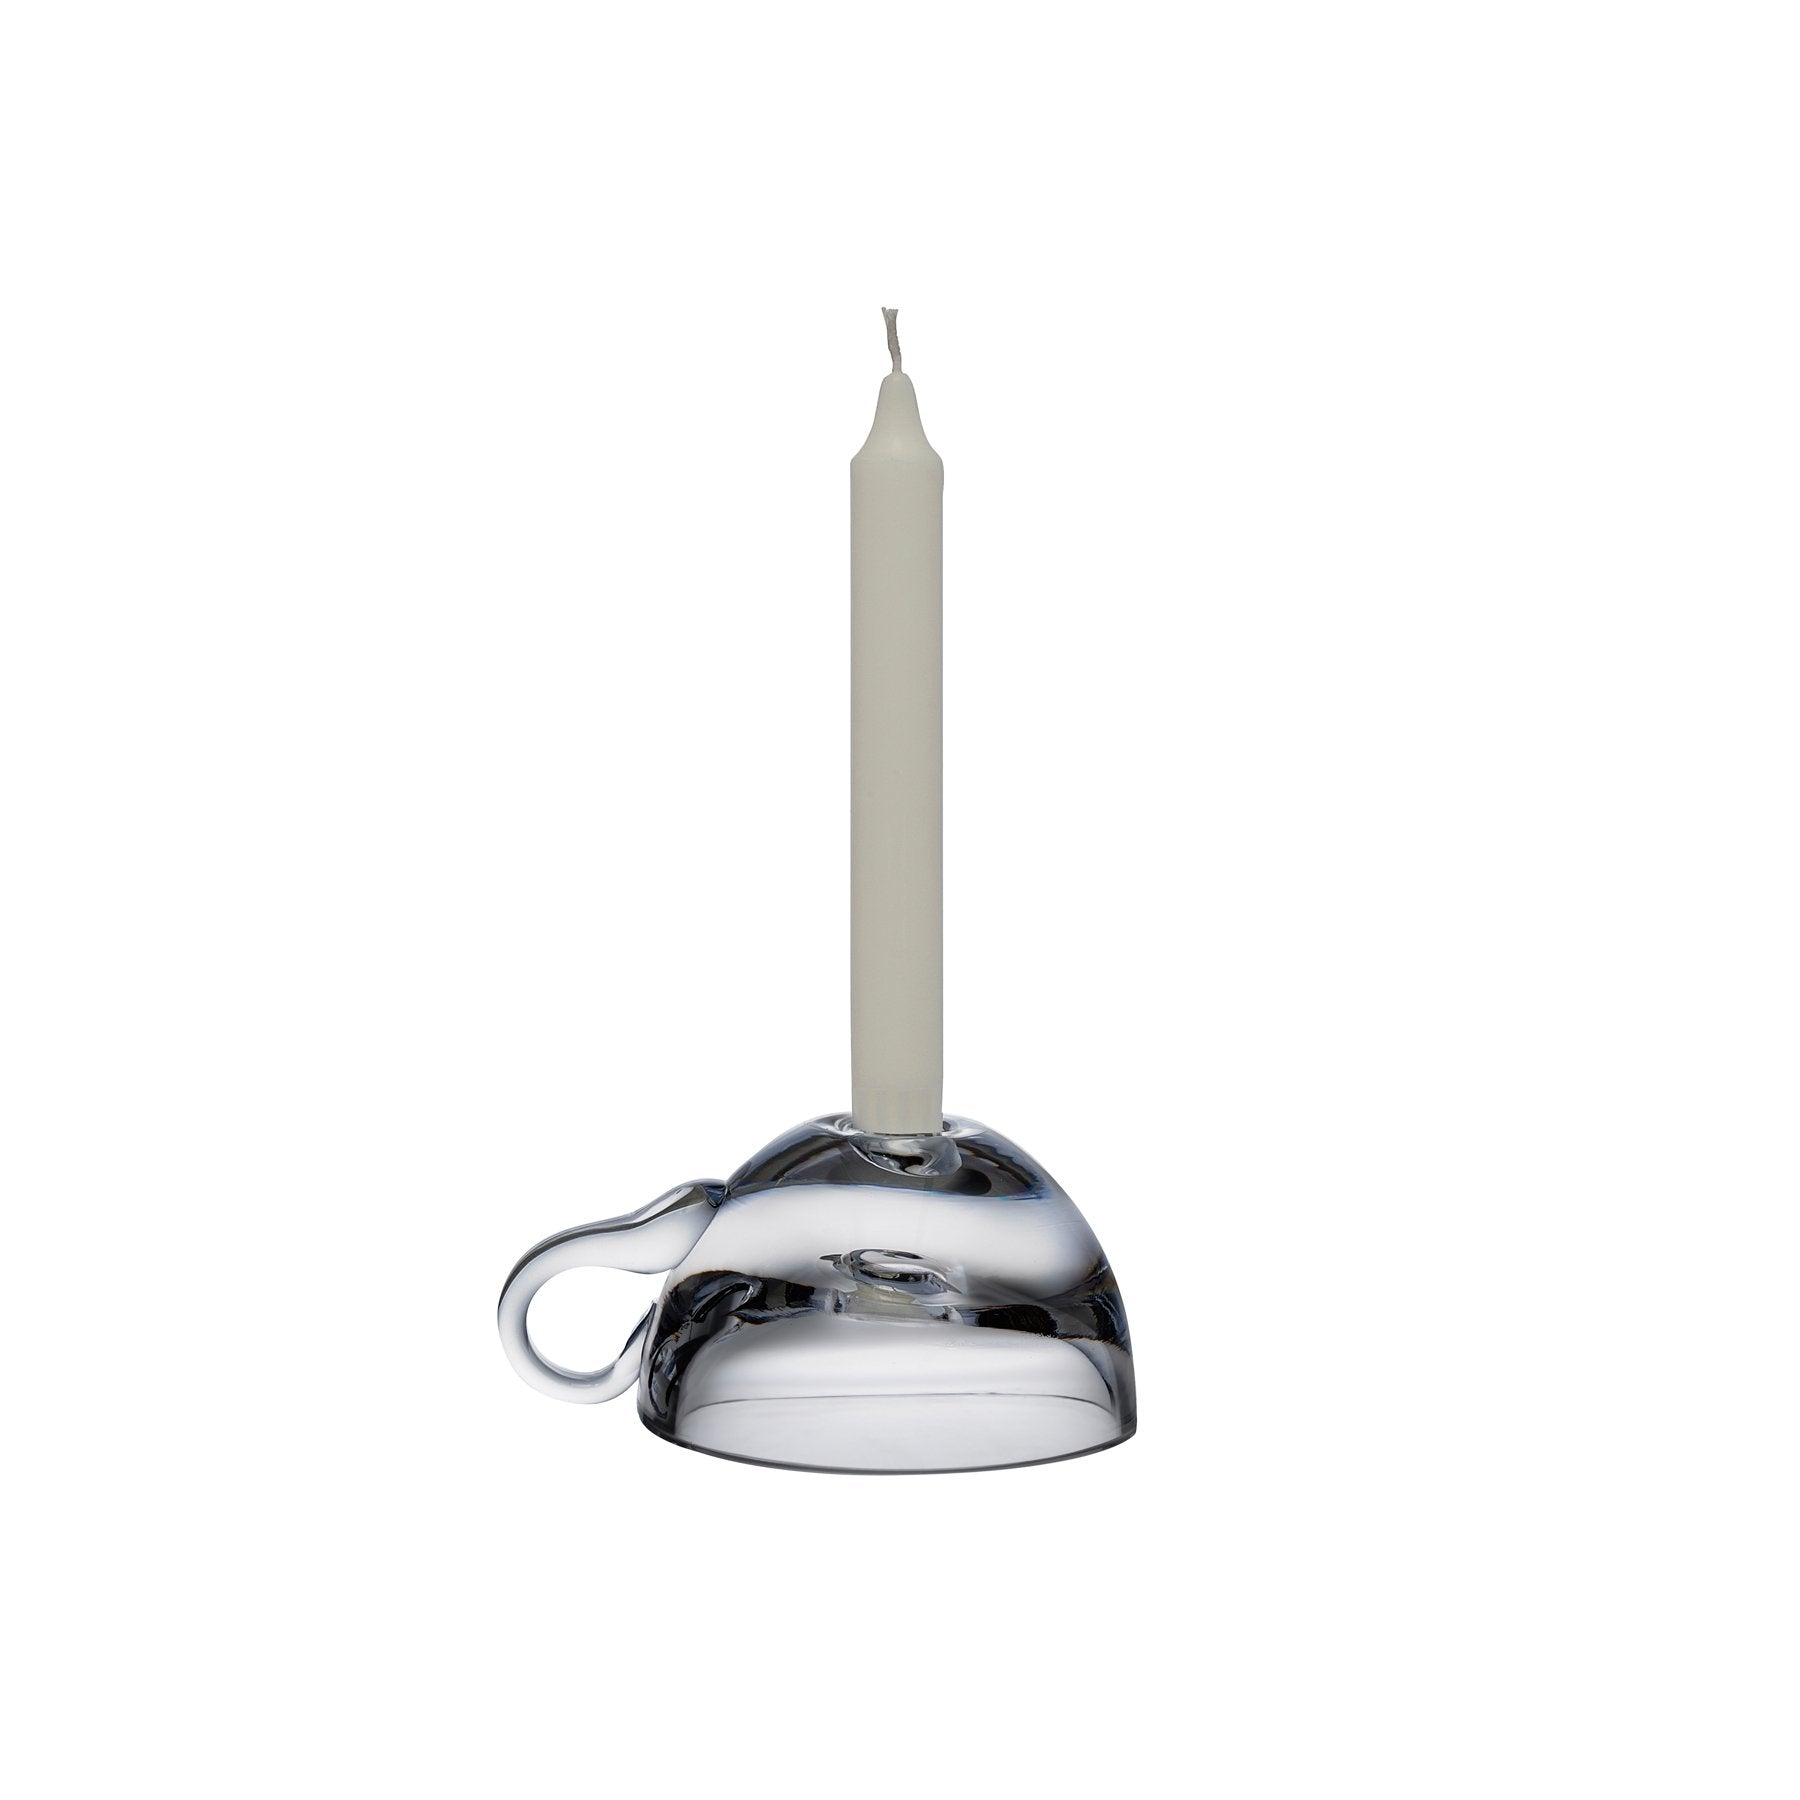 Look Down Candle Holder in Teacup Shape